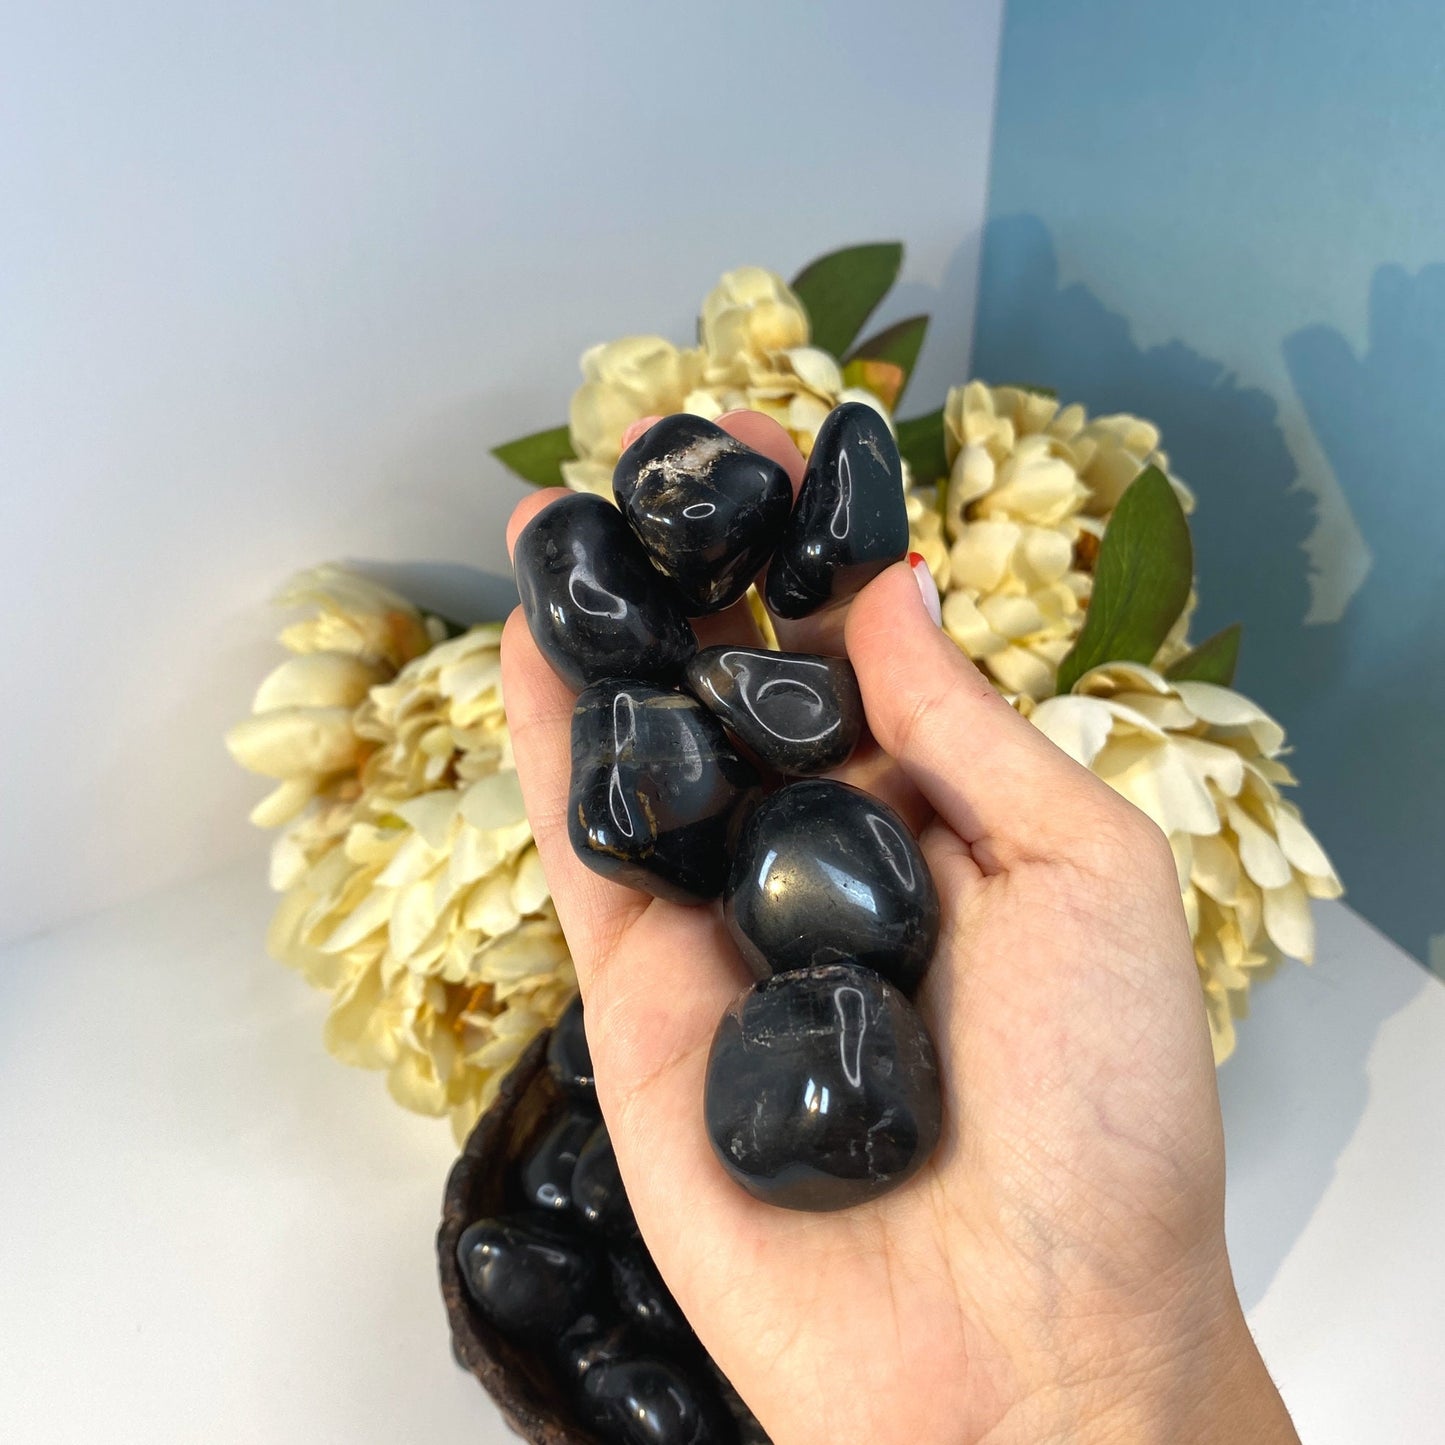 Natural Black Onyx Crystal - Black Tumbled Stone -  Protection and Fortune Crystals - genuine stones for root chakra